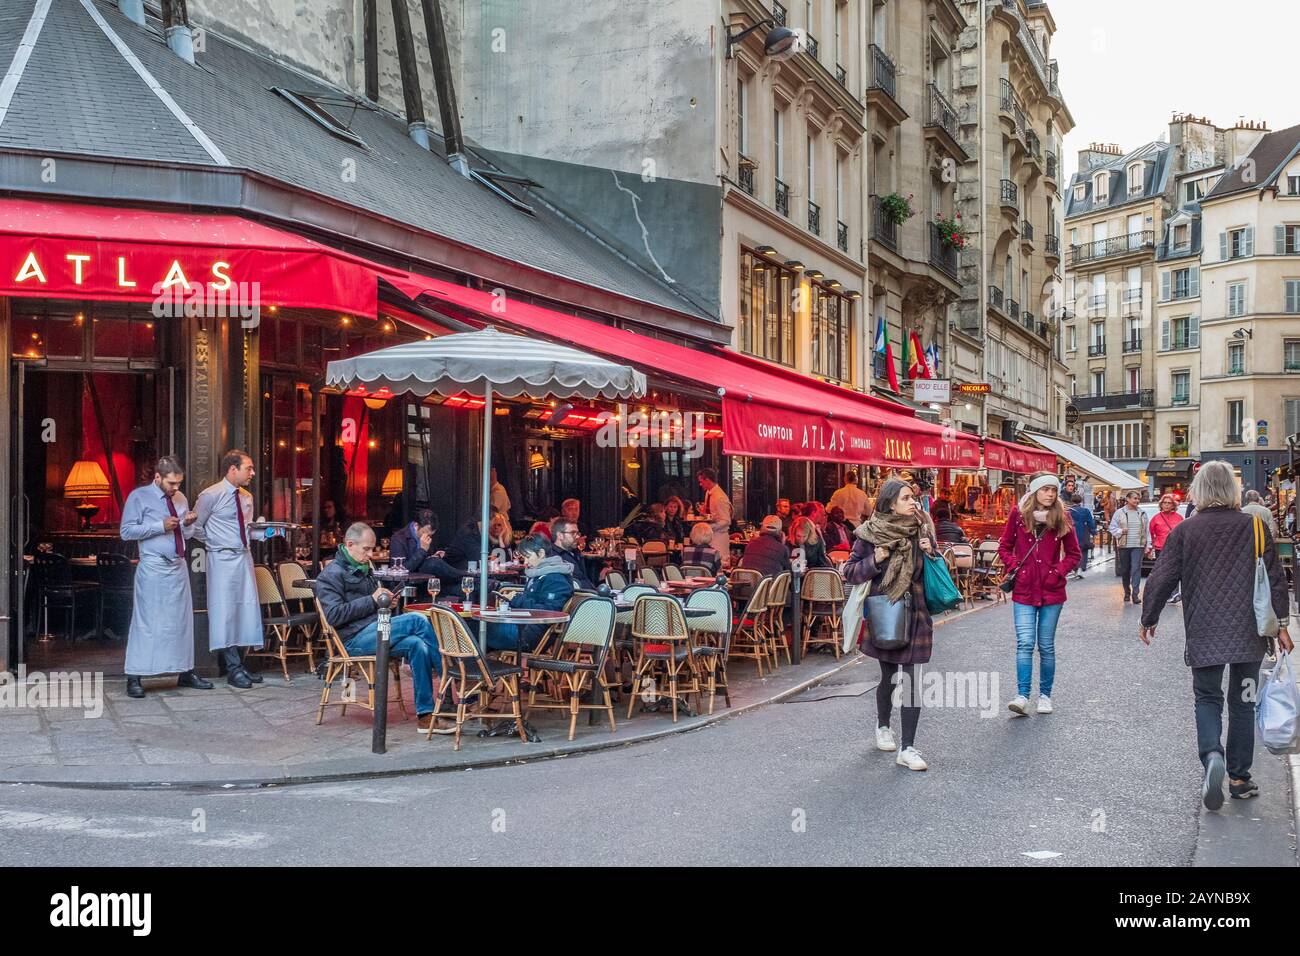 A street scene in Paris with locals sitting outside at a restaurant and people walking through the street Stock Photo